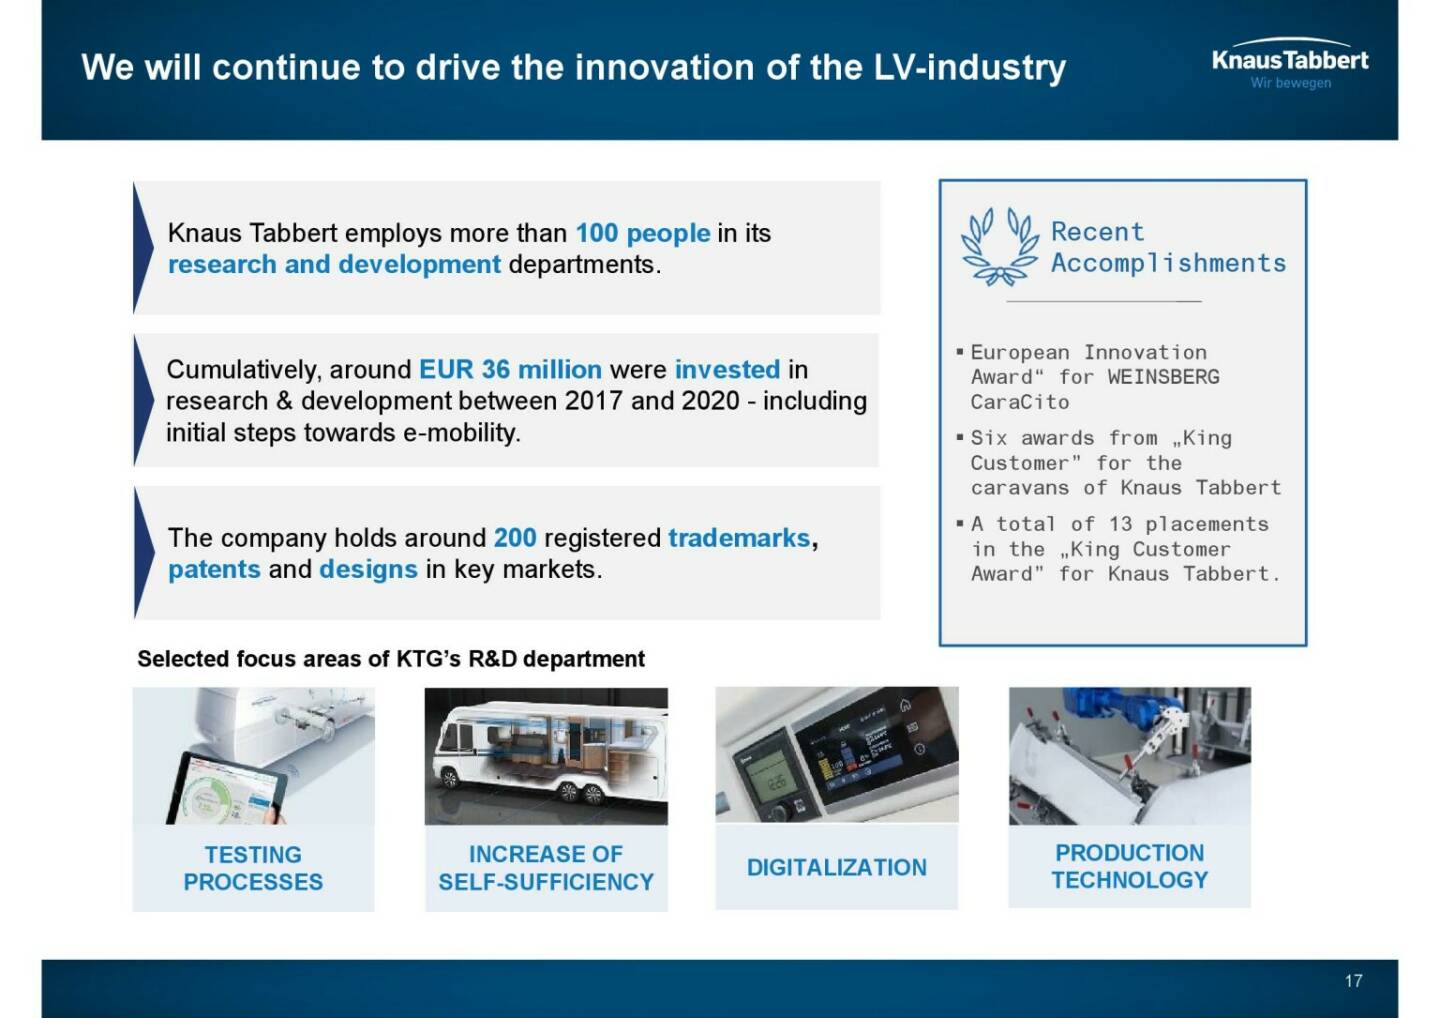 Knaus Tabbert - We will continue to drive the innovation of the LV-industry